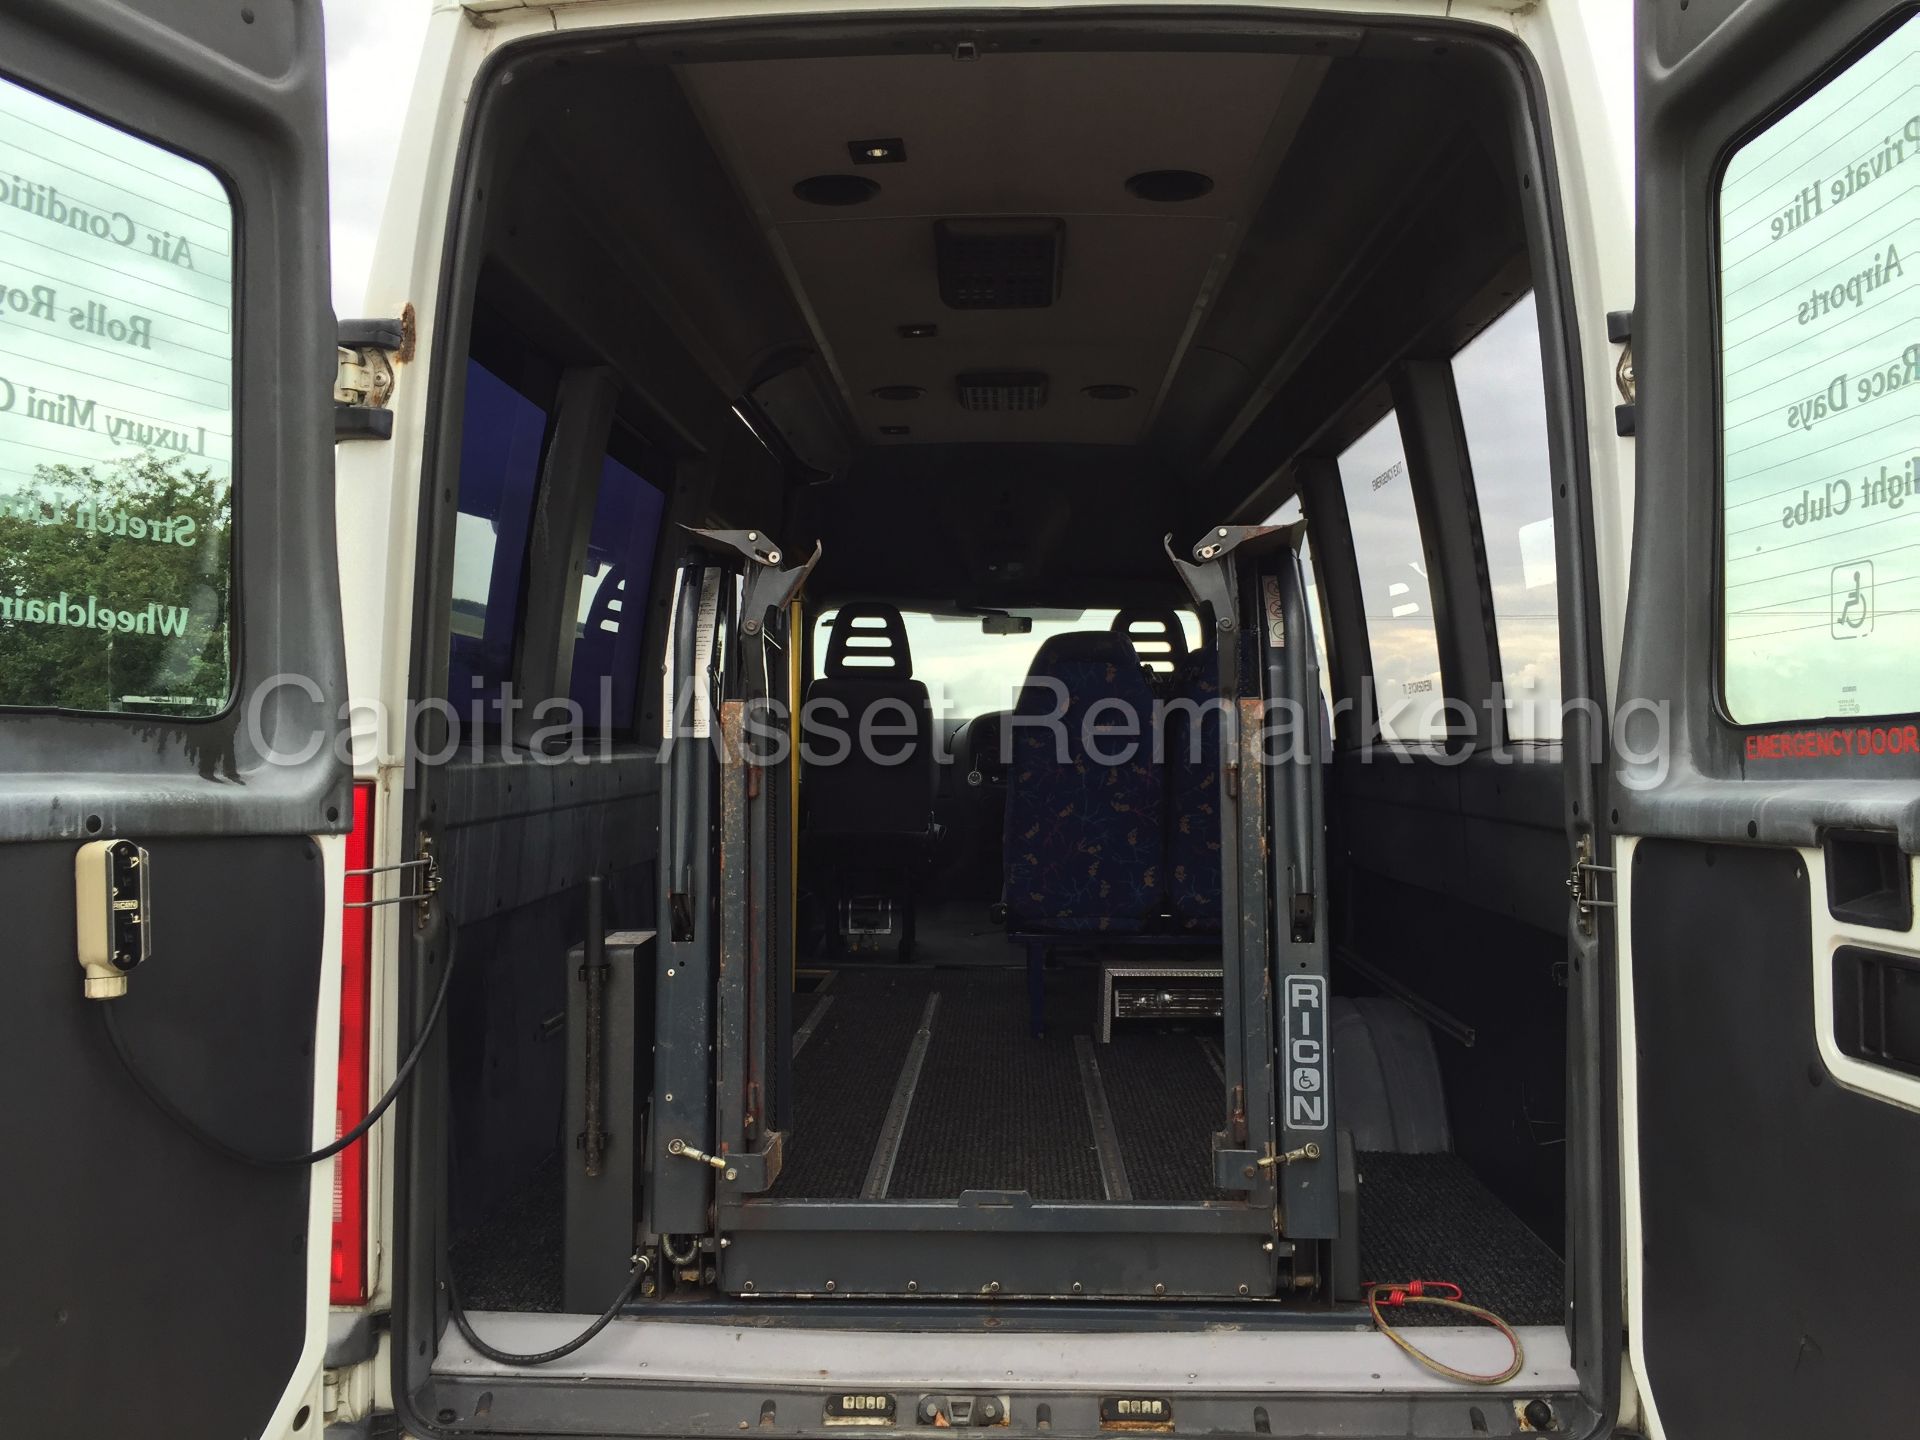 (on sale) IVECO DAILY 35S13 '14 SEATER MINI-BUS' (2003 - 03 REG) '2.3 DIESEL - 6 SPEED' (NO VAT) - Image 15 of 23